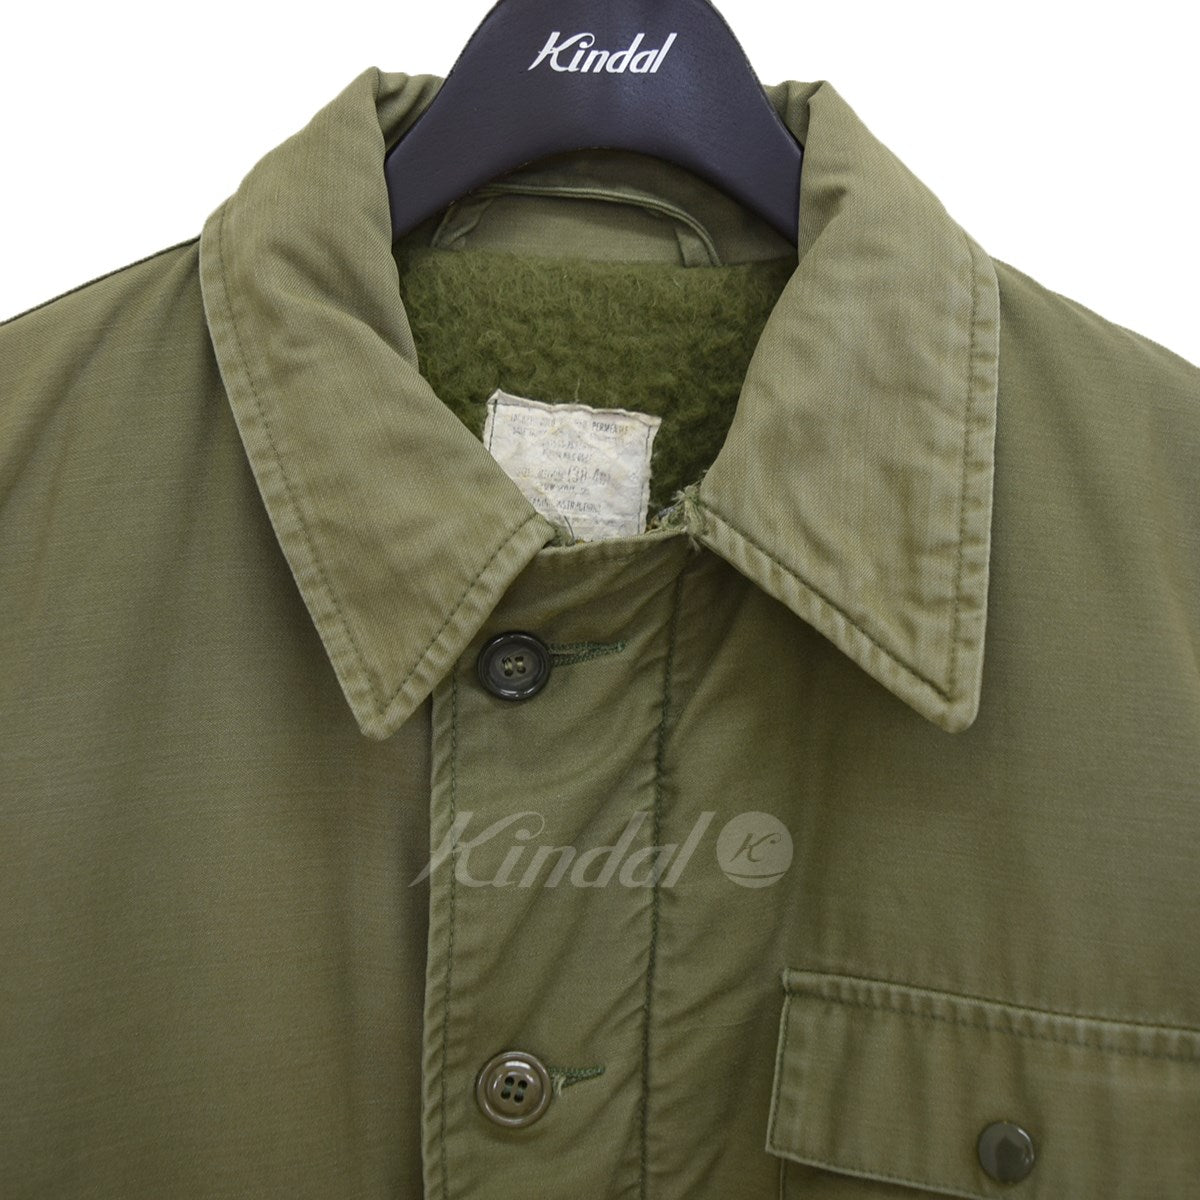 A2 JACKET COLD WEATHER PERMEABLE A-2デッキジャケット 80S